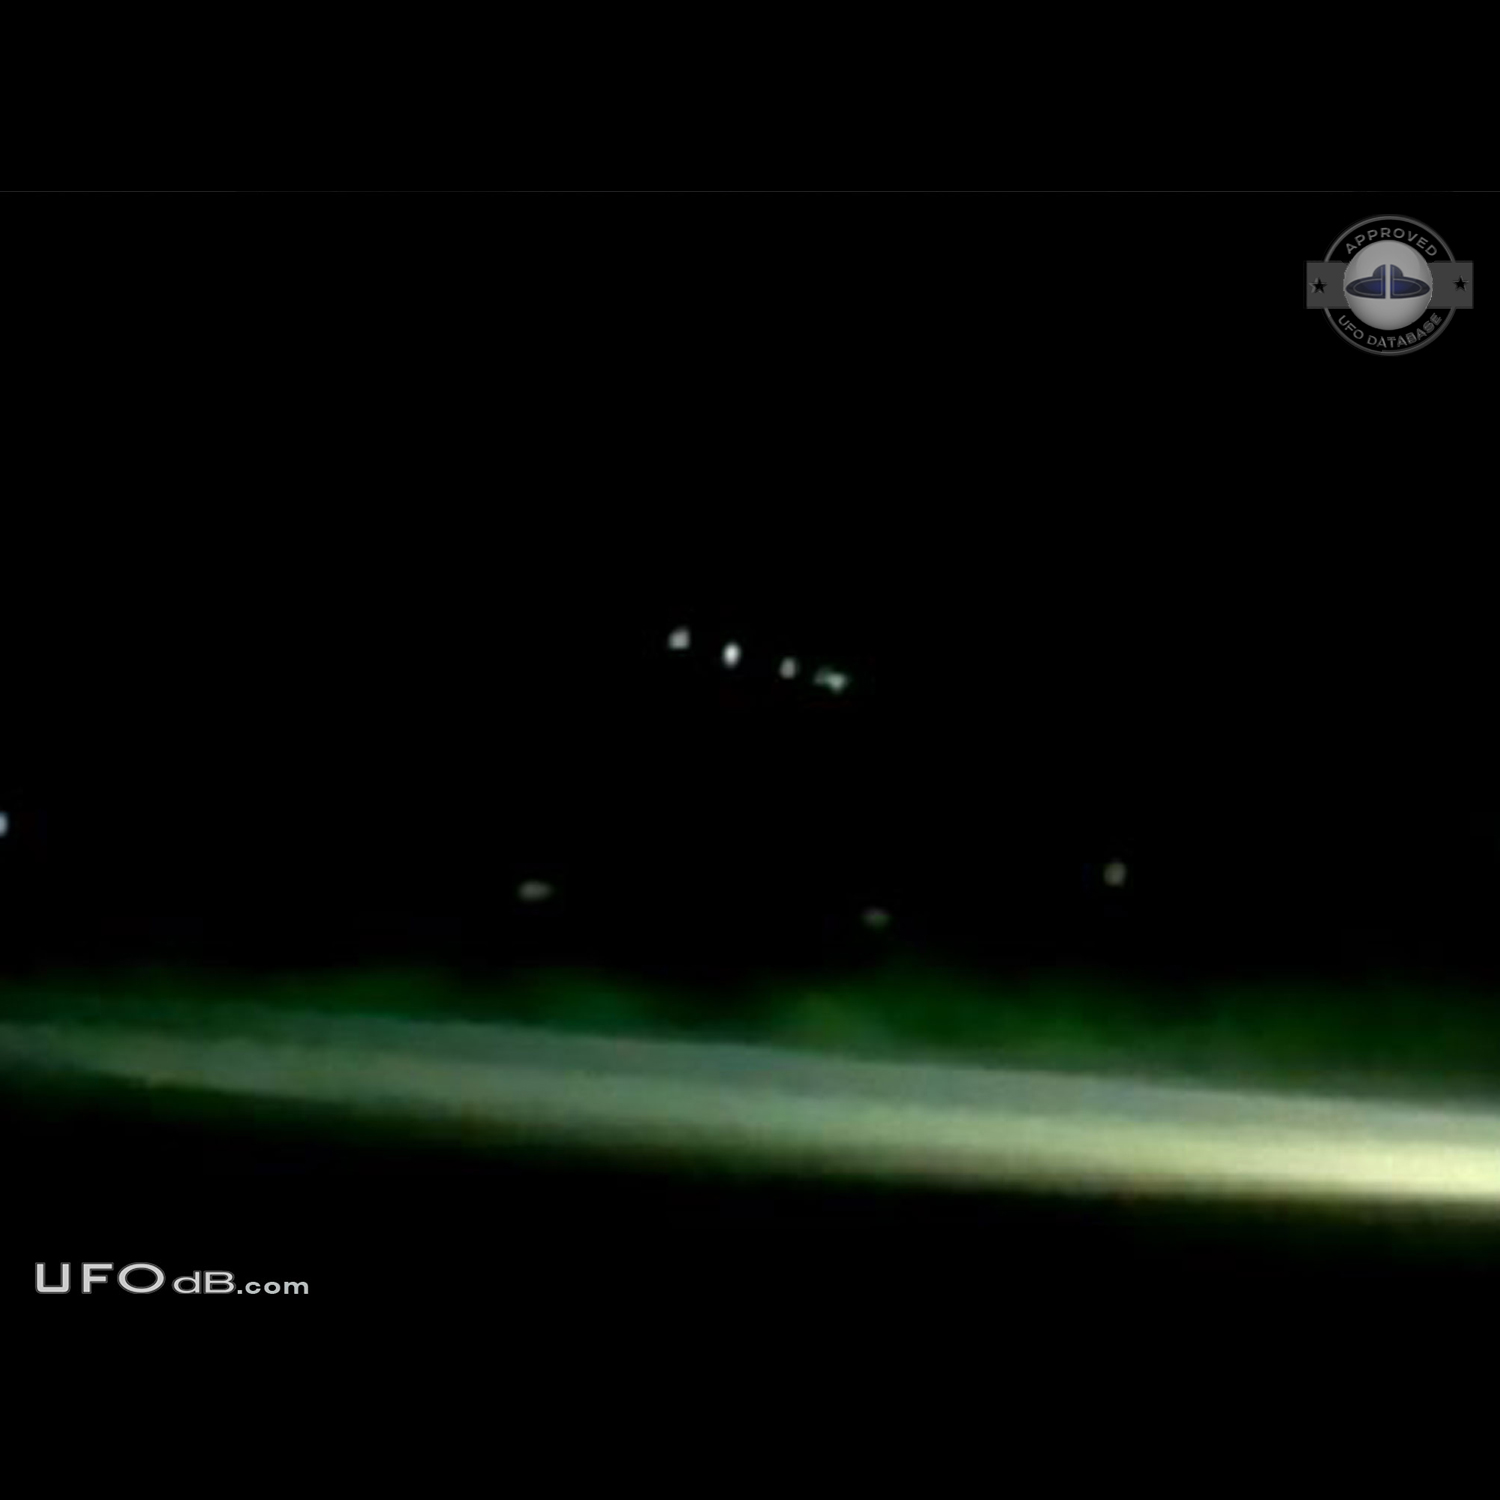 Fleet of 5 bright lights UFOs seen by many witnesses in Johannesburg UFO Picture #487-1